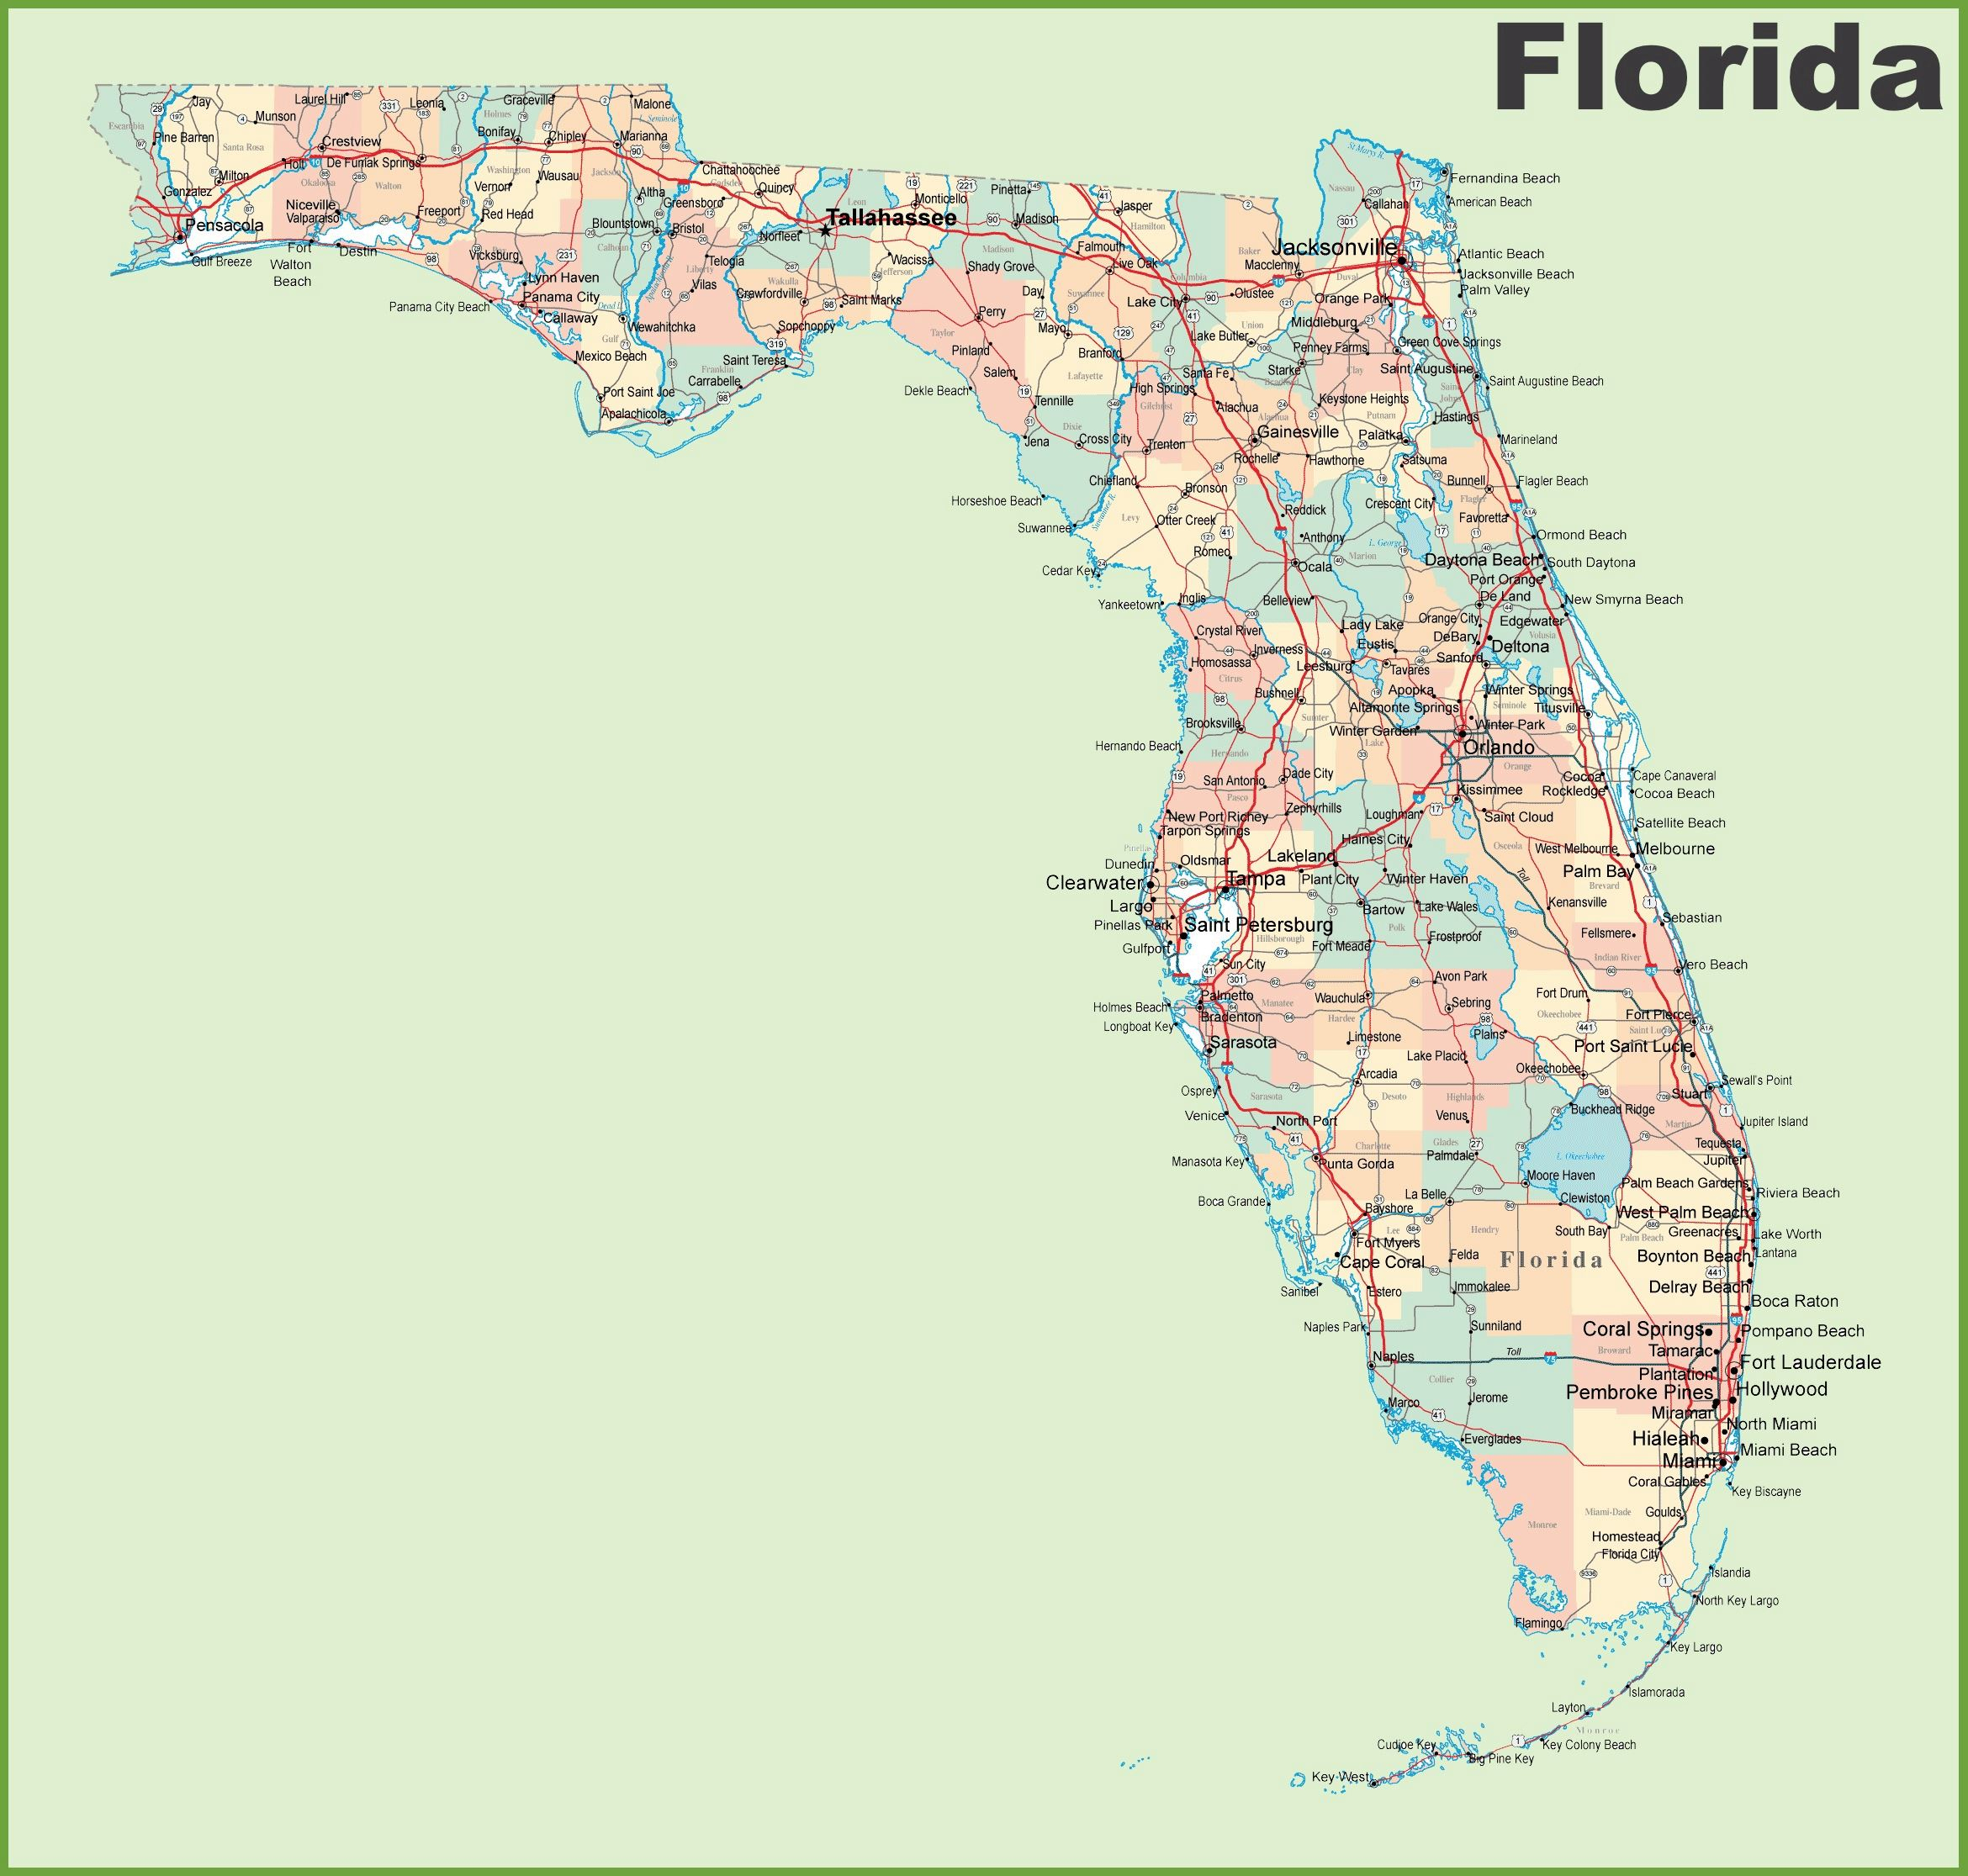 Large Florida Maps For Free Download And Print | High-Resolution And - Map Of South Florida Beaches